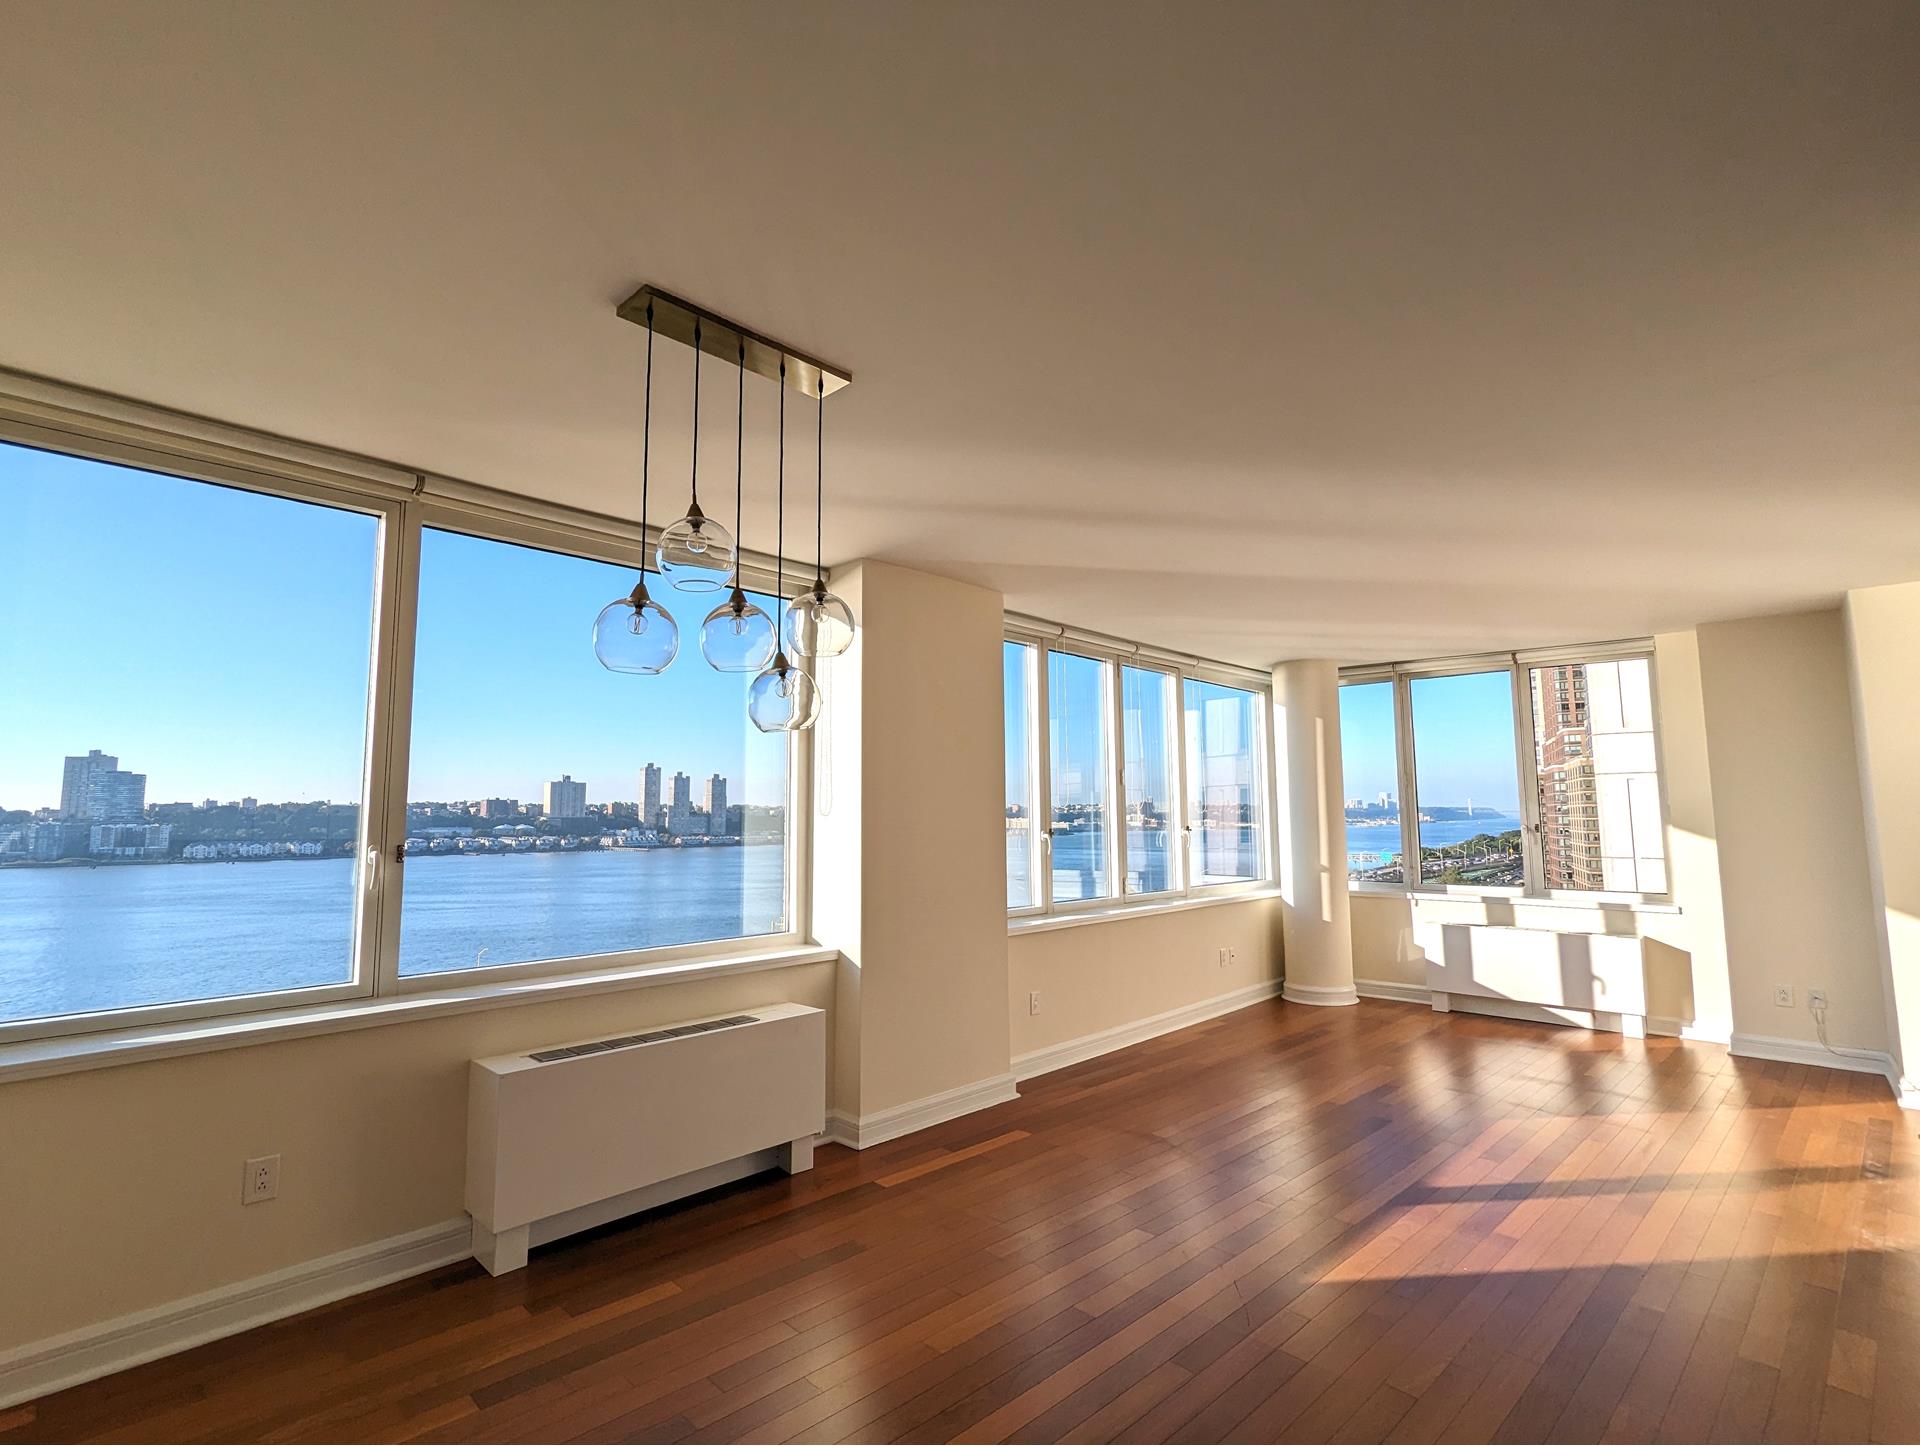 100 Riverside Boulevard 12F, Lincoln Sq, Upper West Side, NYC - 3 Bedrooms  
2 Bathrooms  
5 Rooms - 